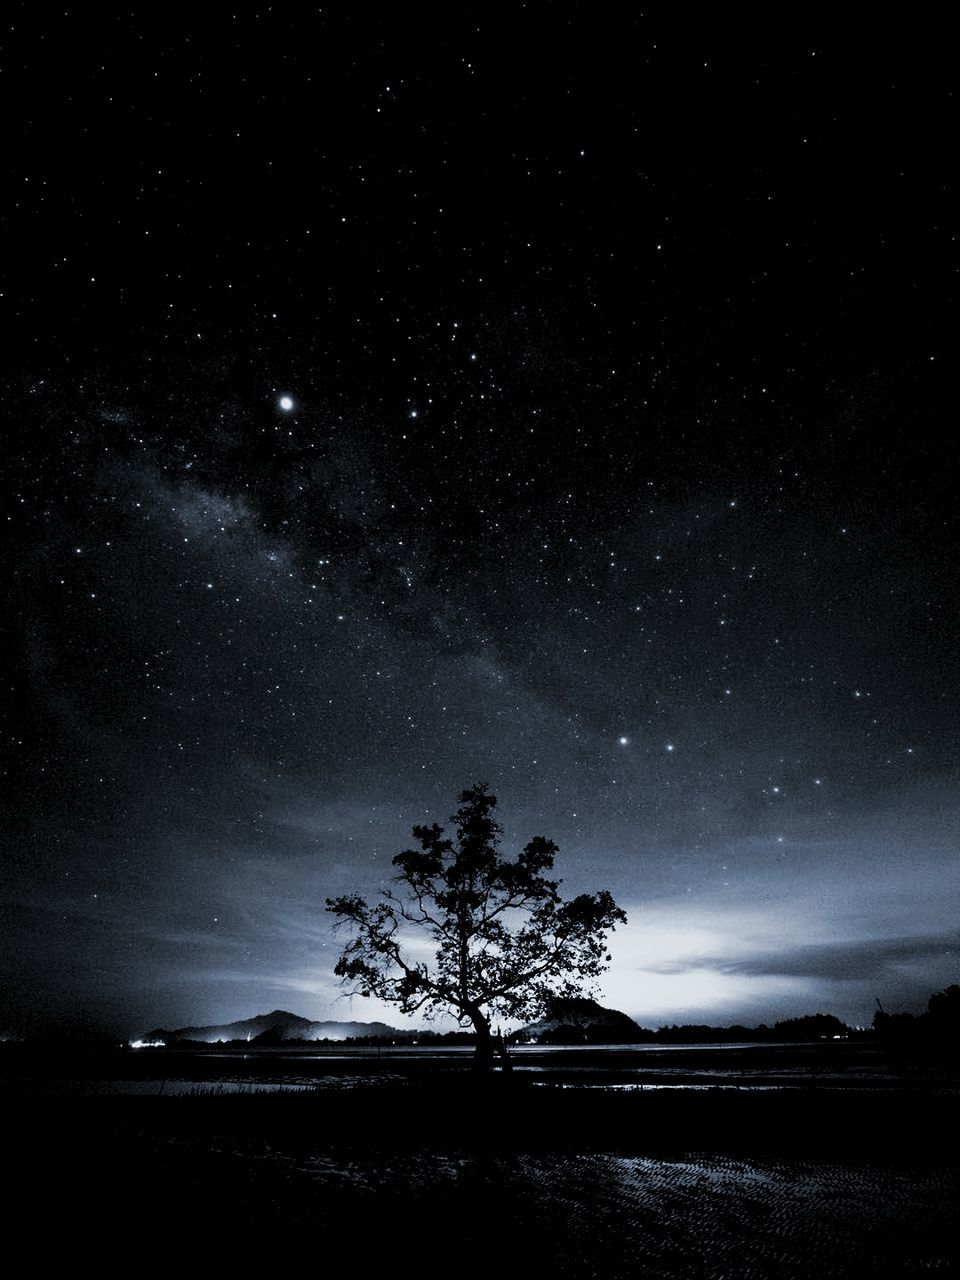 night, star - space, space, sky, astronomy, beauty in nature, tree, scenics - nature, tranquility, plant, star, tranquil scene, no people, nature, galaxy, star field, idyllic, land, landscape, water, outdoors, space and astronomy